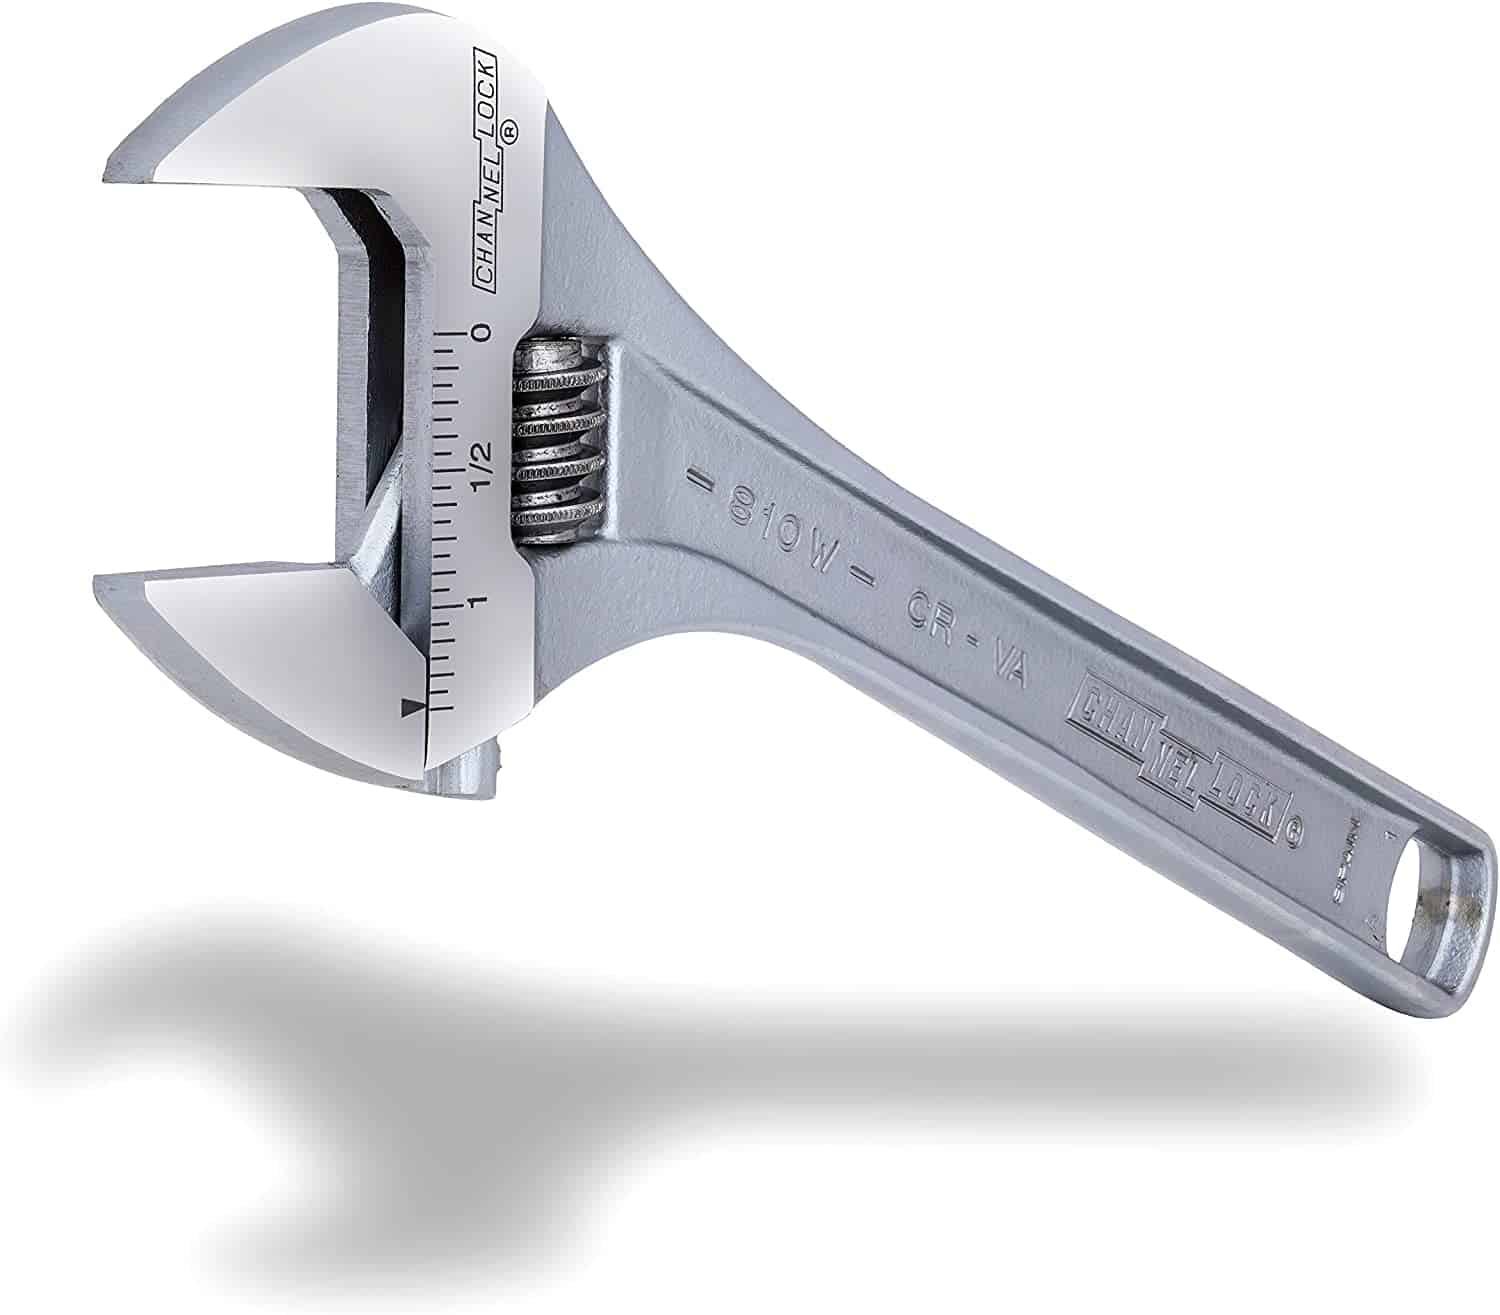 Best large adjustable wrench- Channellock Chrome 10″